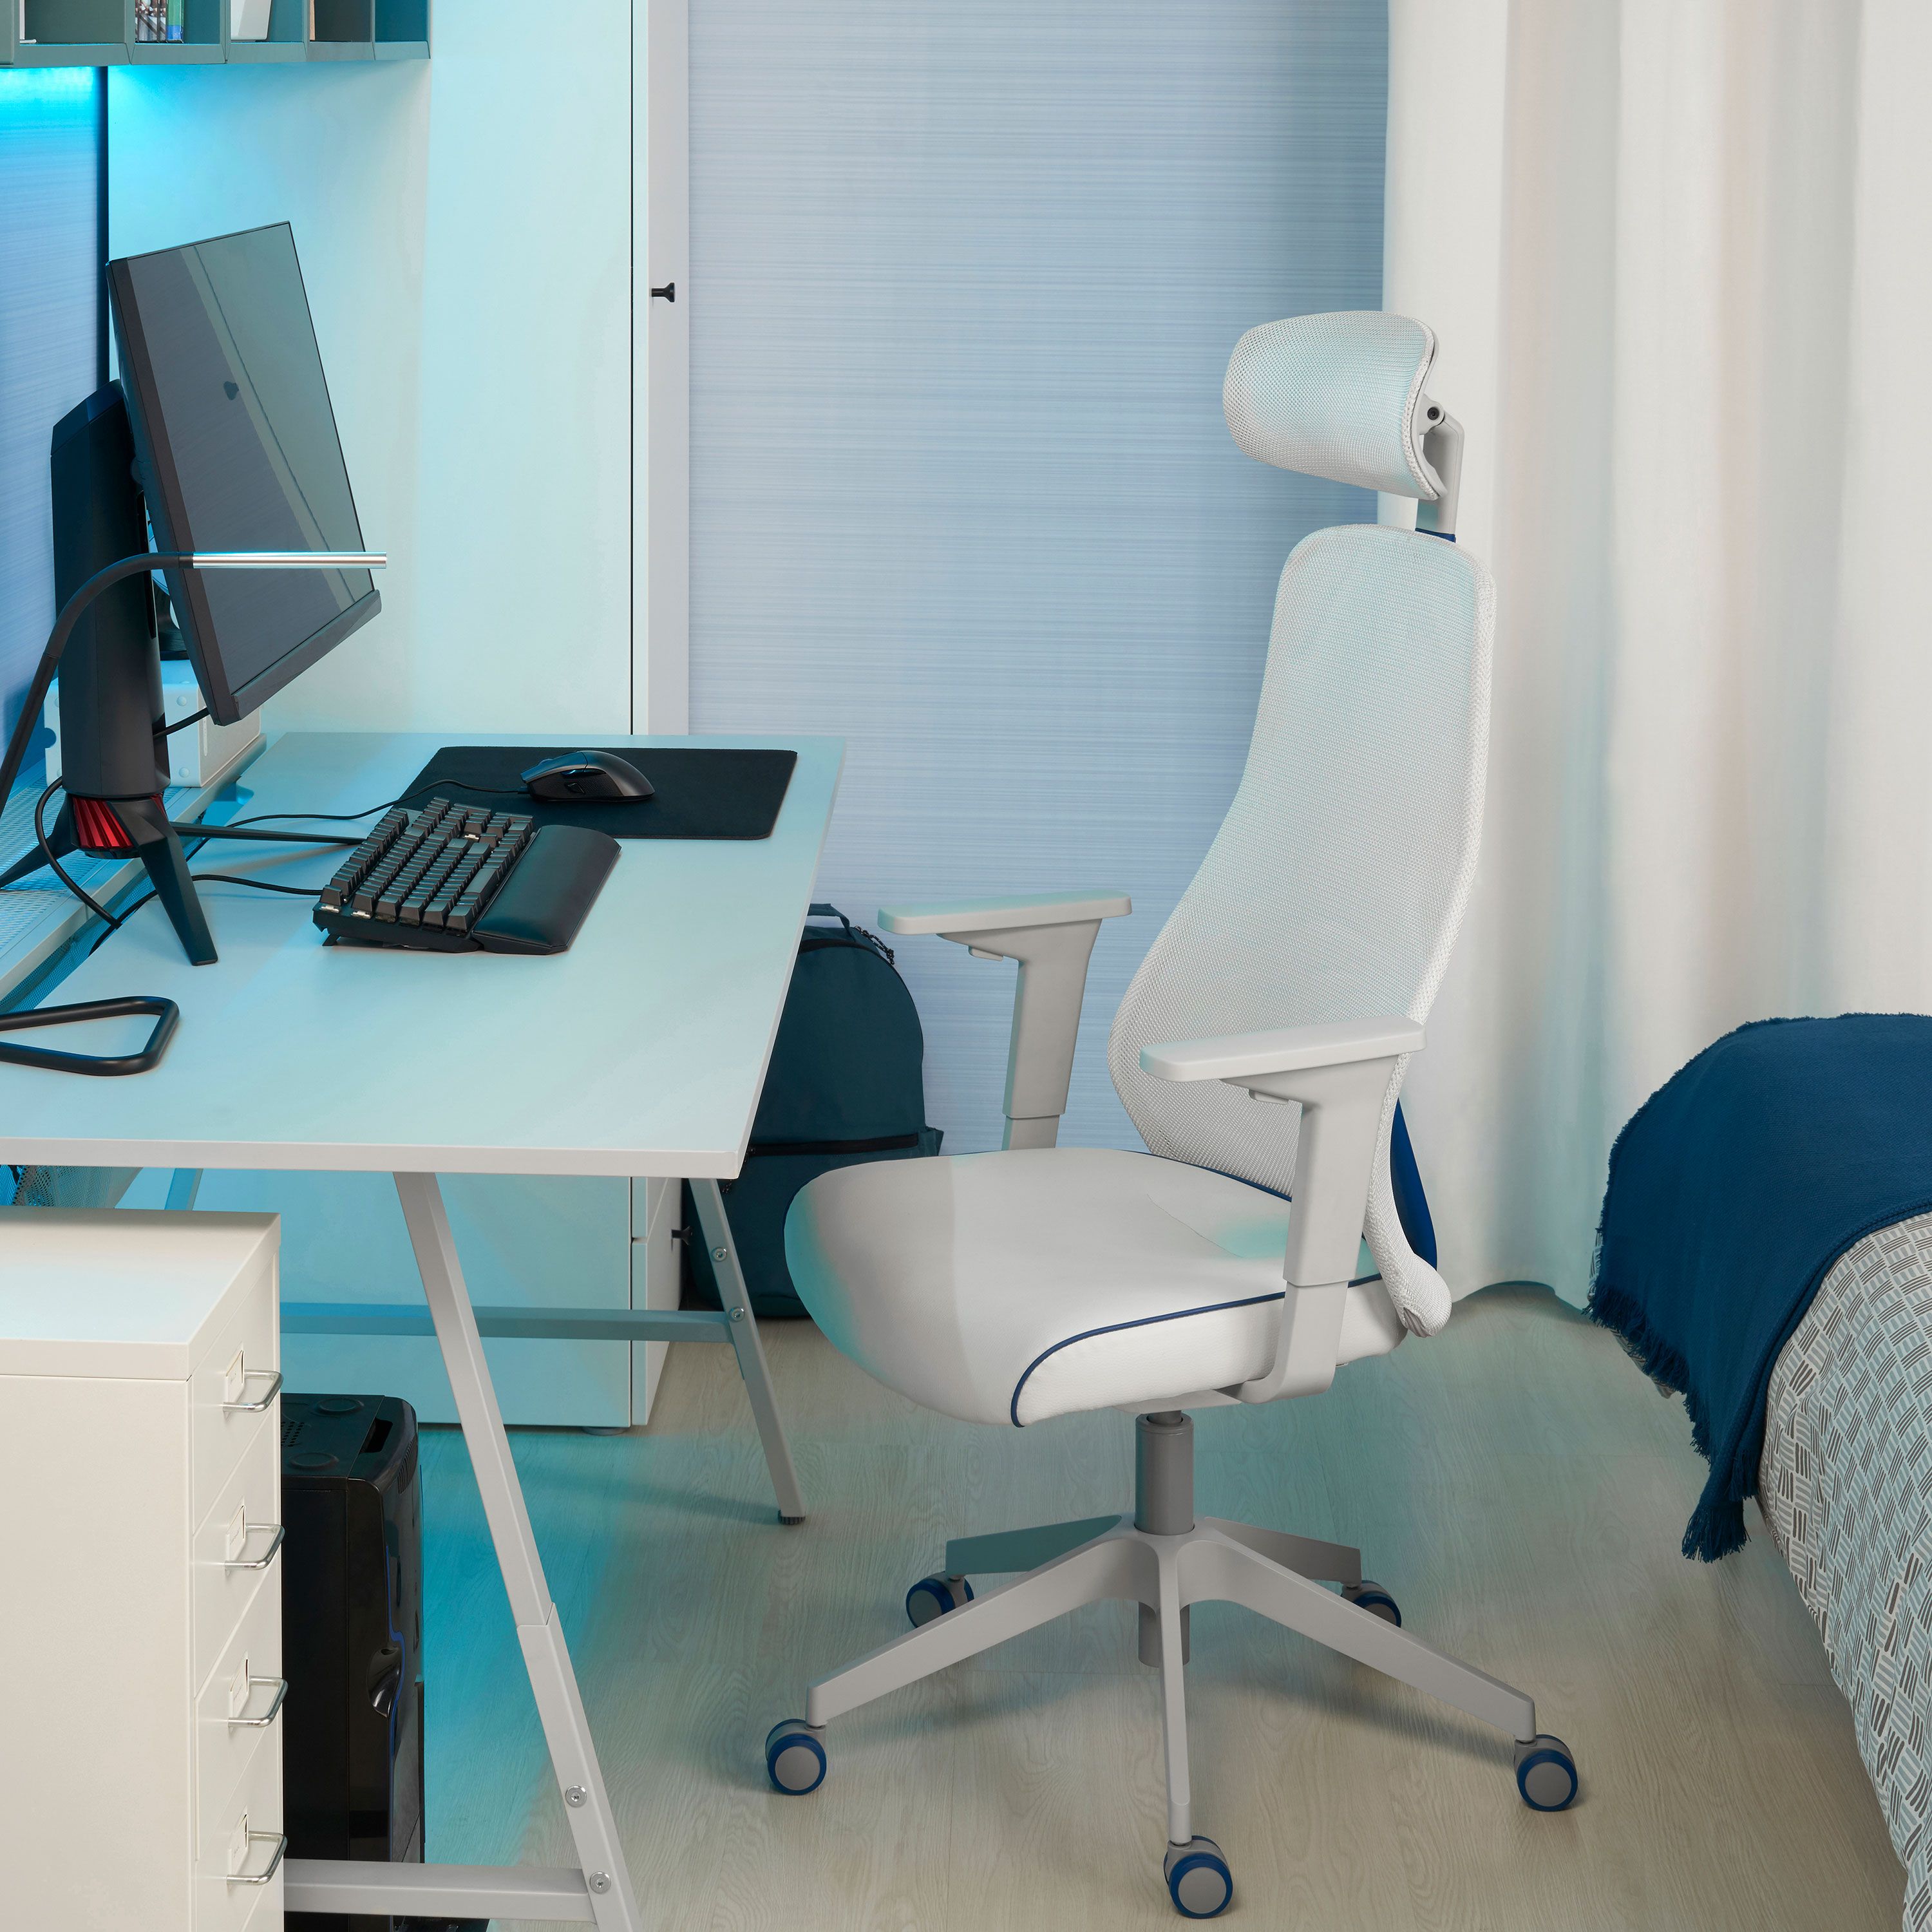 Desk chairs - Computer chairs - IKEA